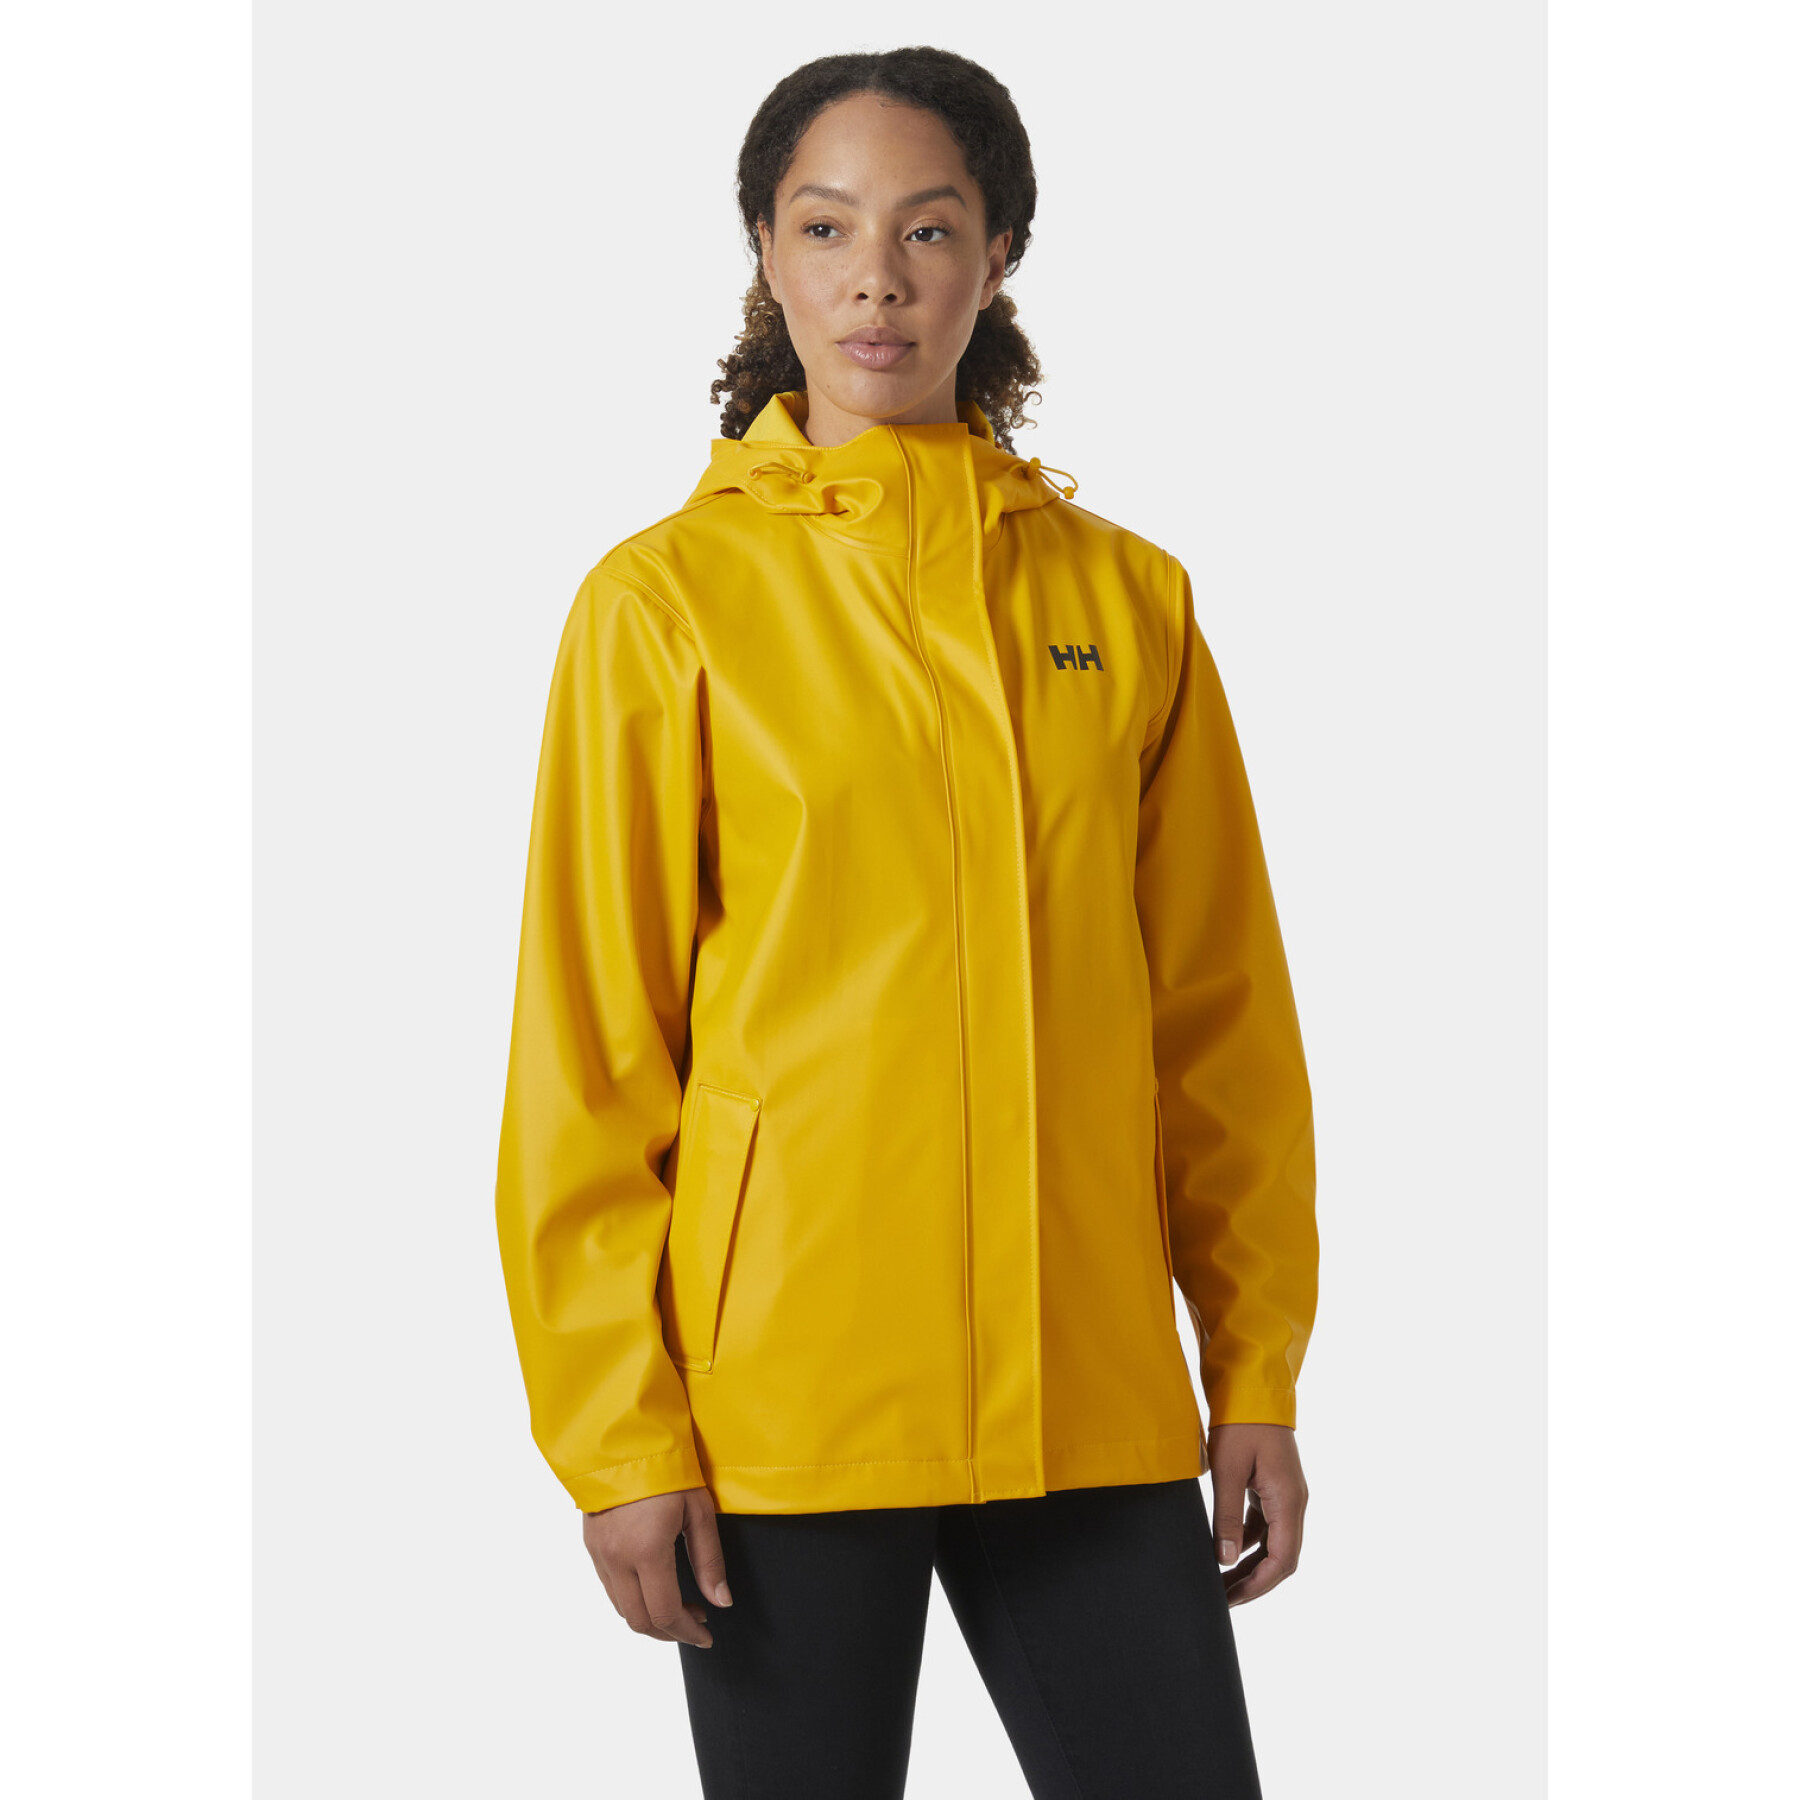 Chaqueta impermeable mujer Helly Hansen moss